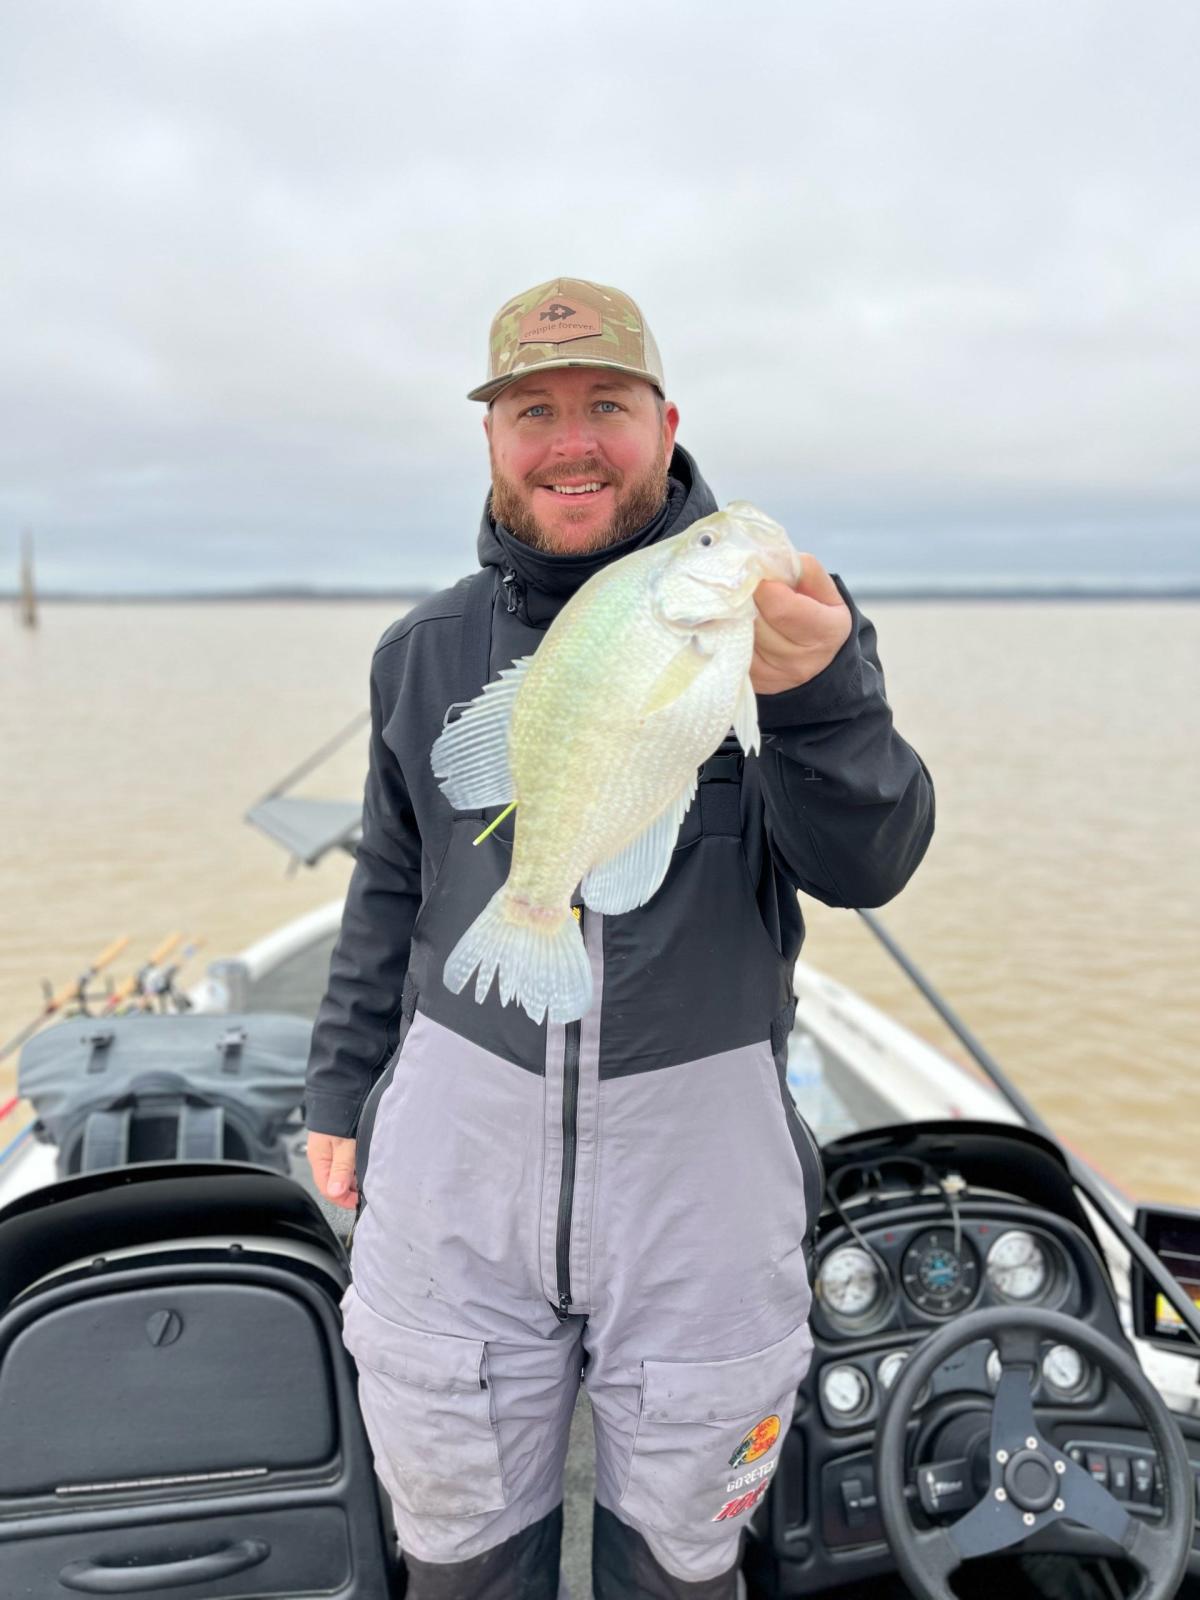 Top 5 Mississippi state lakes for crappie